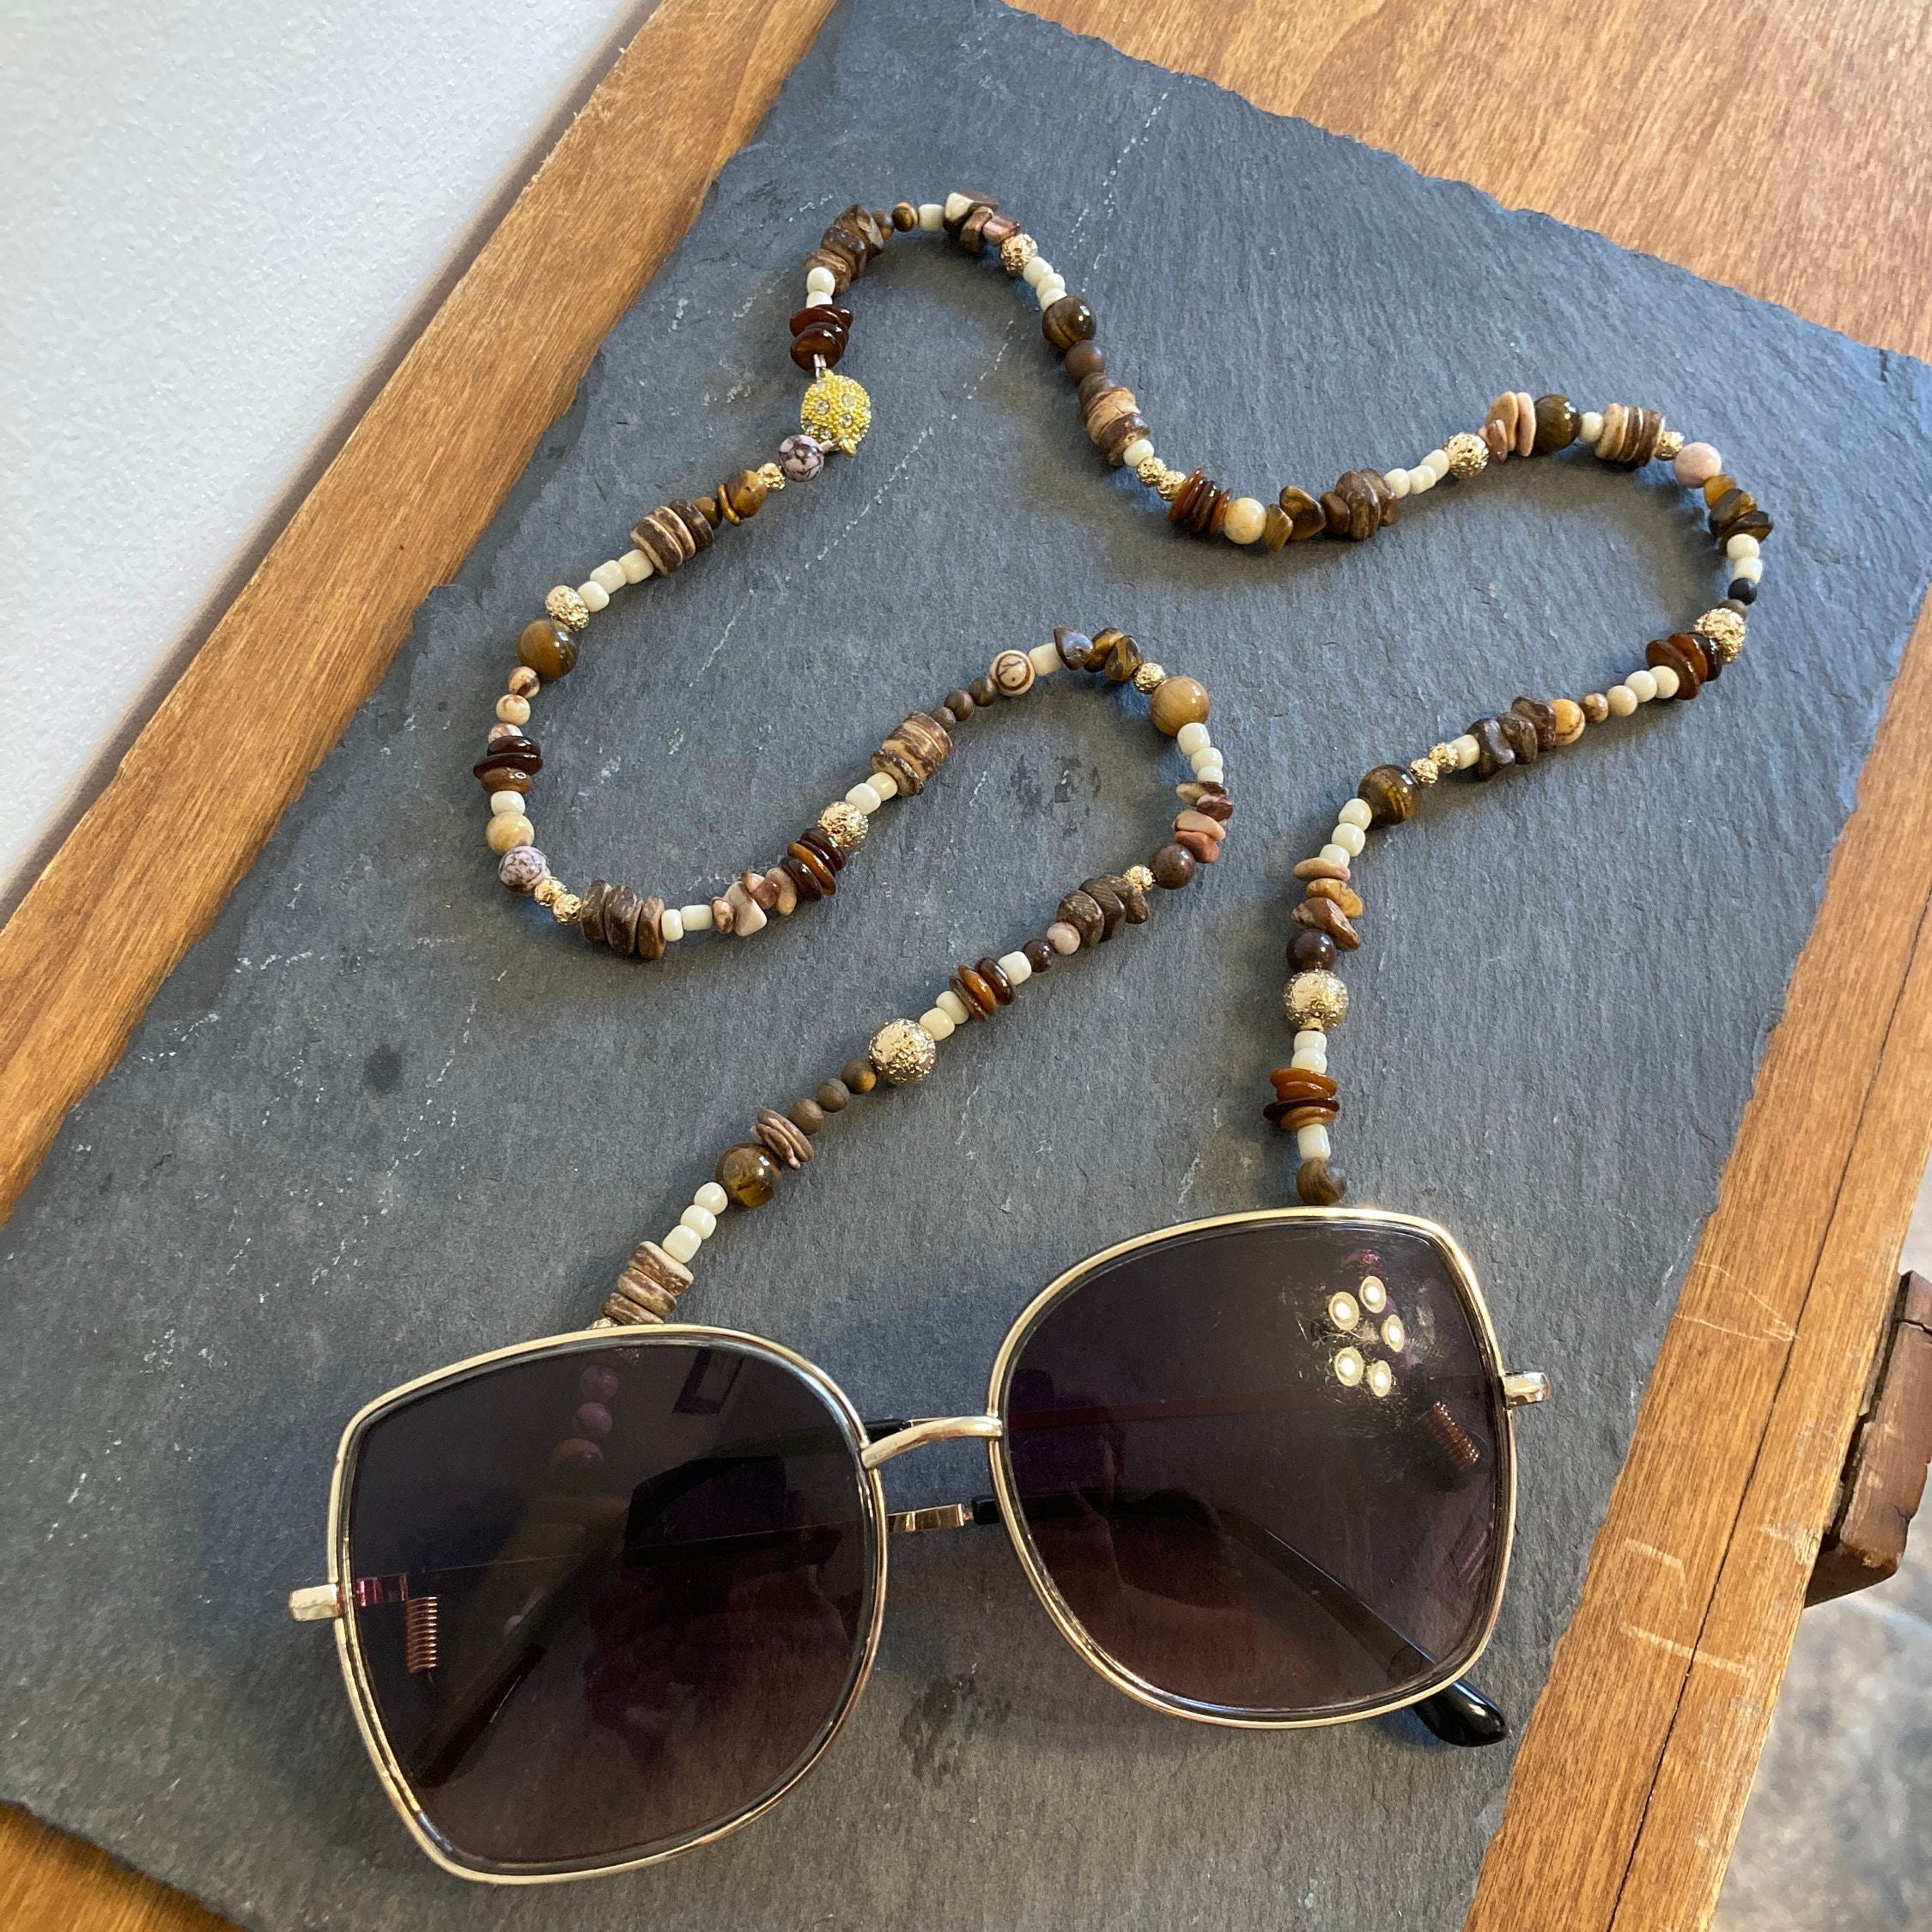 Women's glasses chain in old gold color